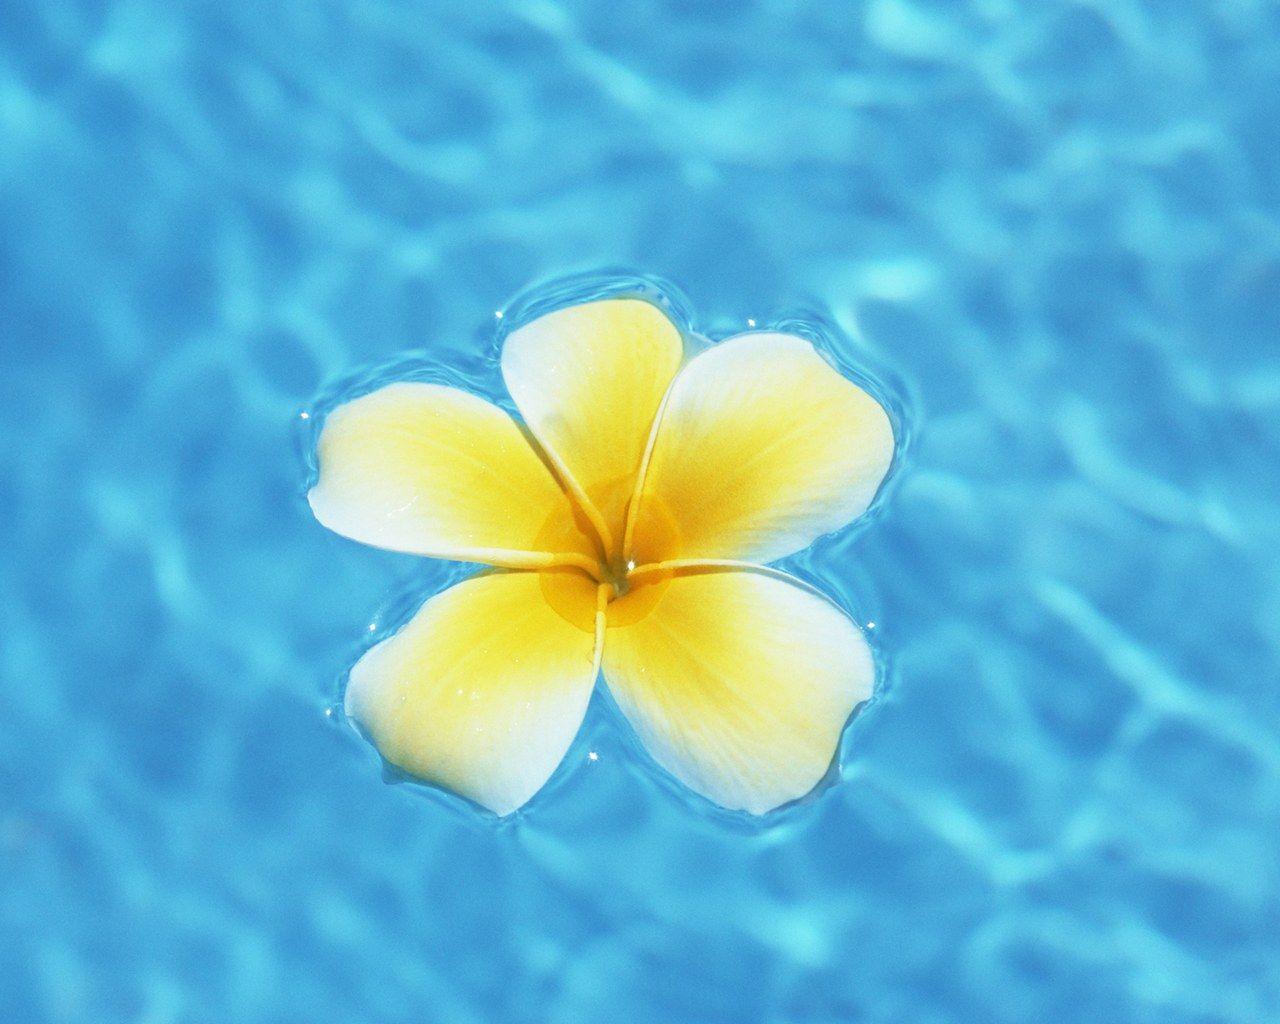 Hawaiian Flowers On The Beach Wallpaper Image & Picture